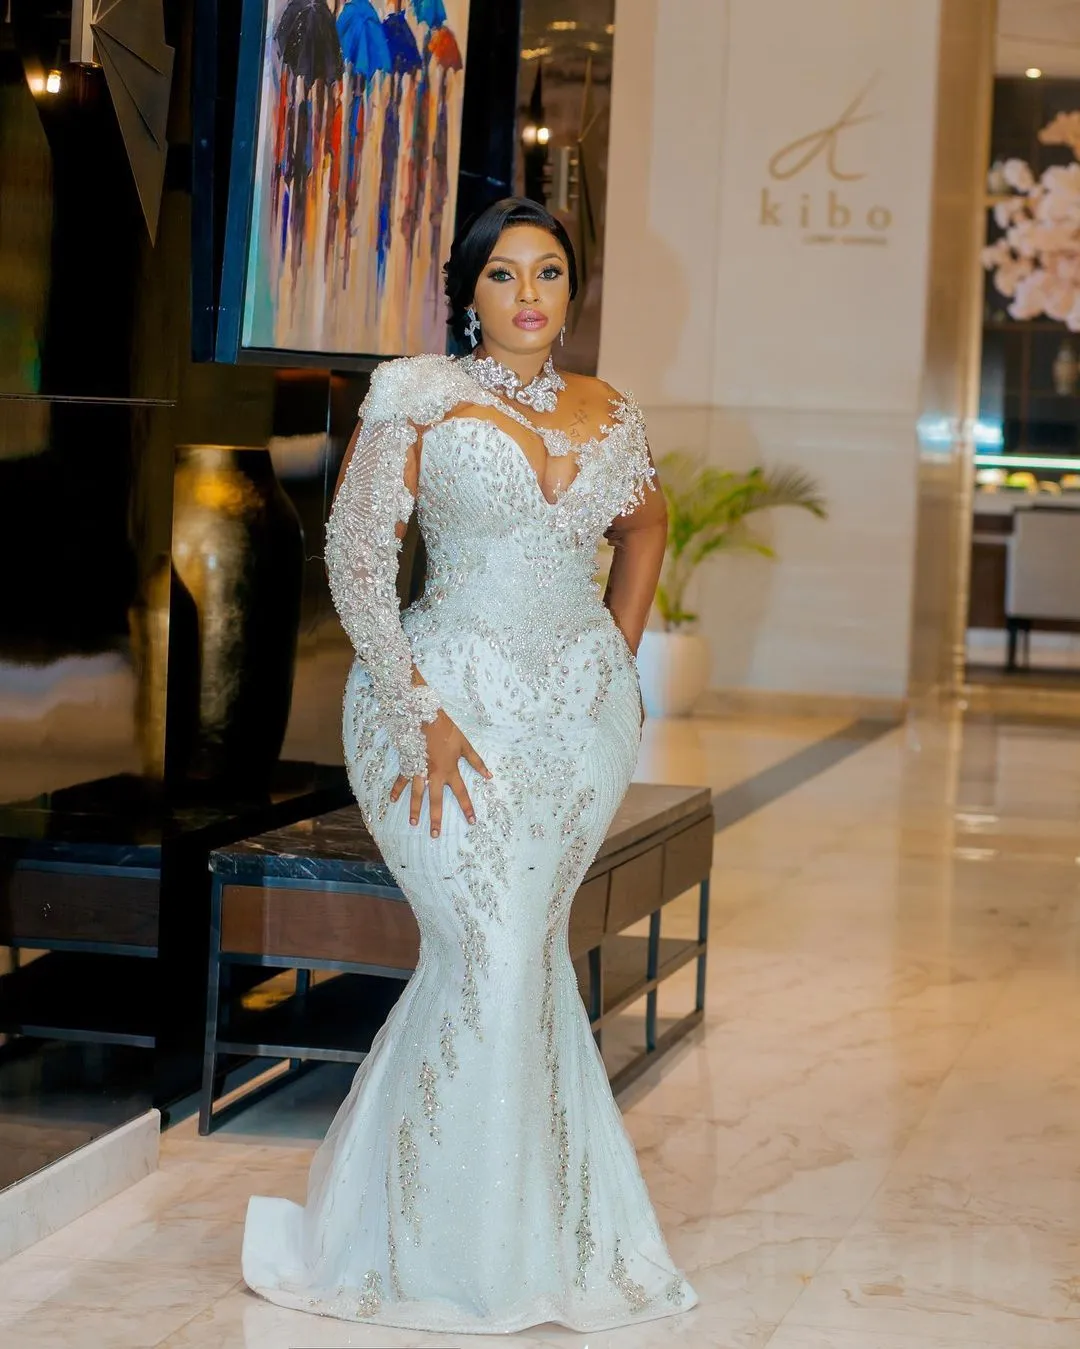 Arabic White Mermaid Wedding Dress Beaded Crystals Lace Long Sleeve Bridal Gowns With Detachable Train Dresses